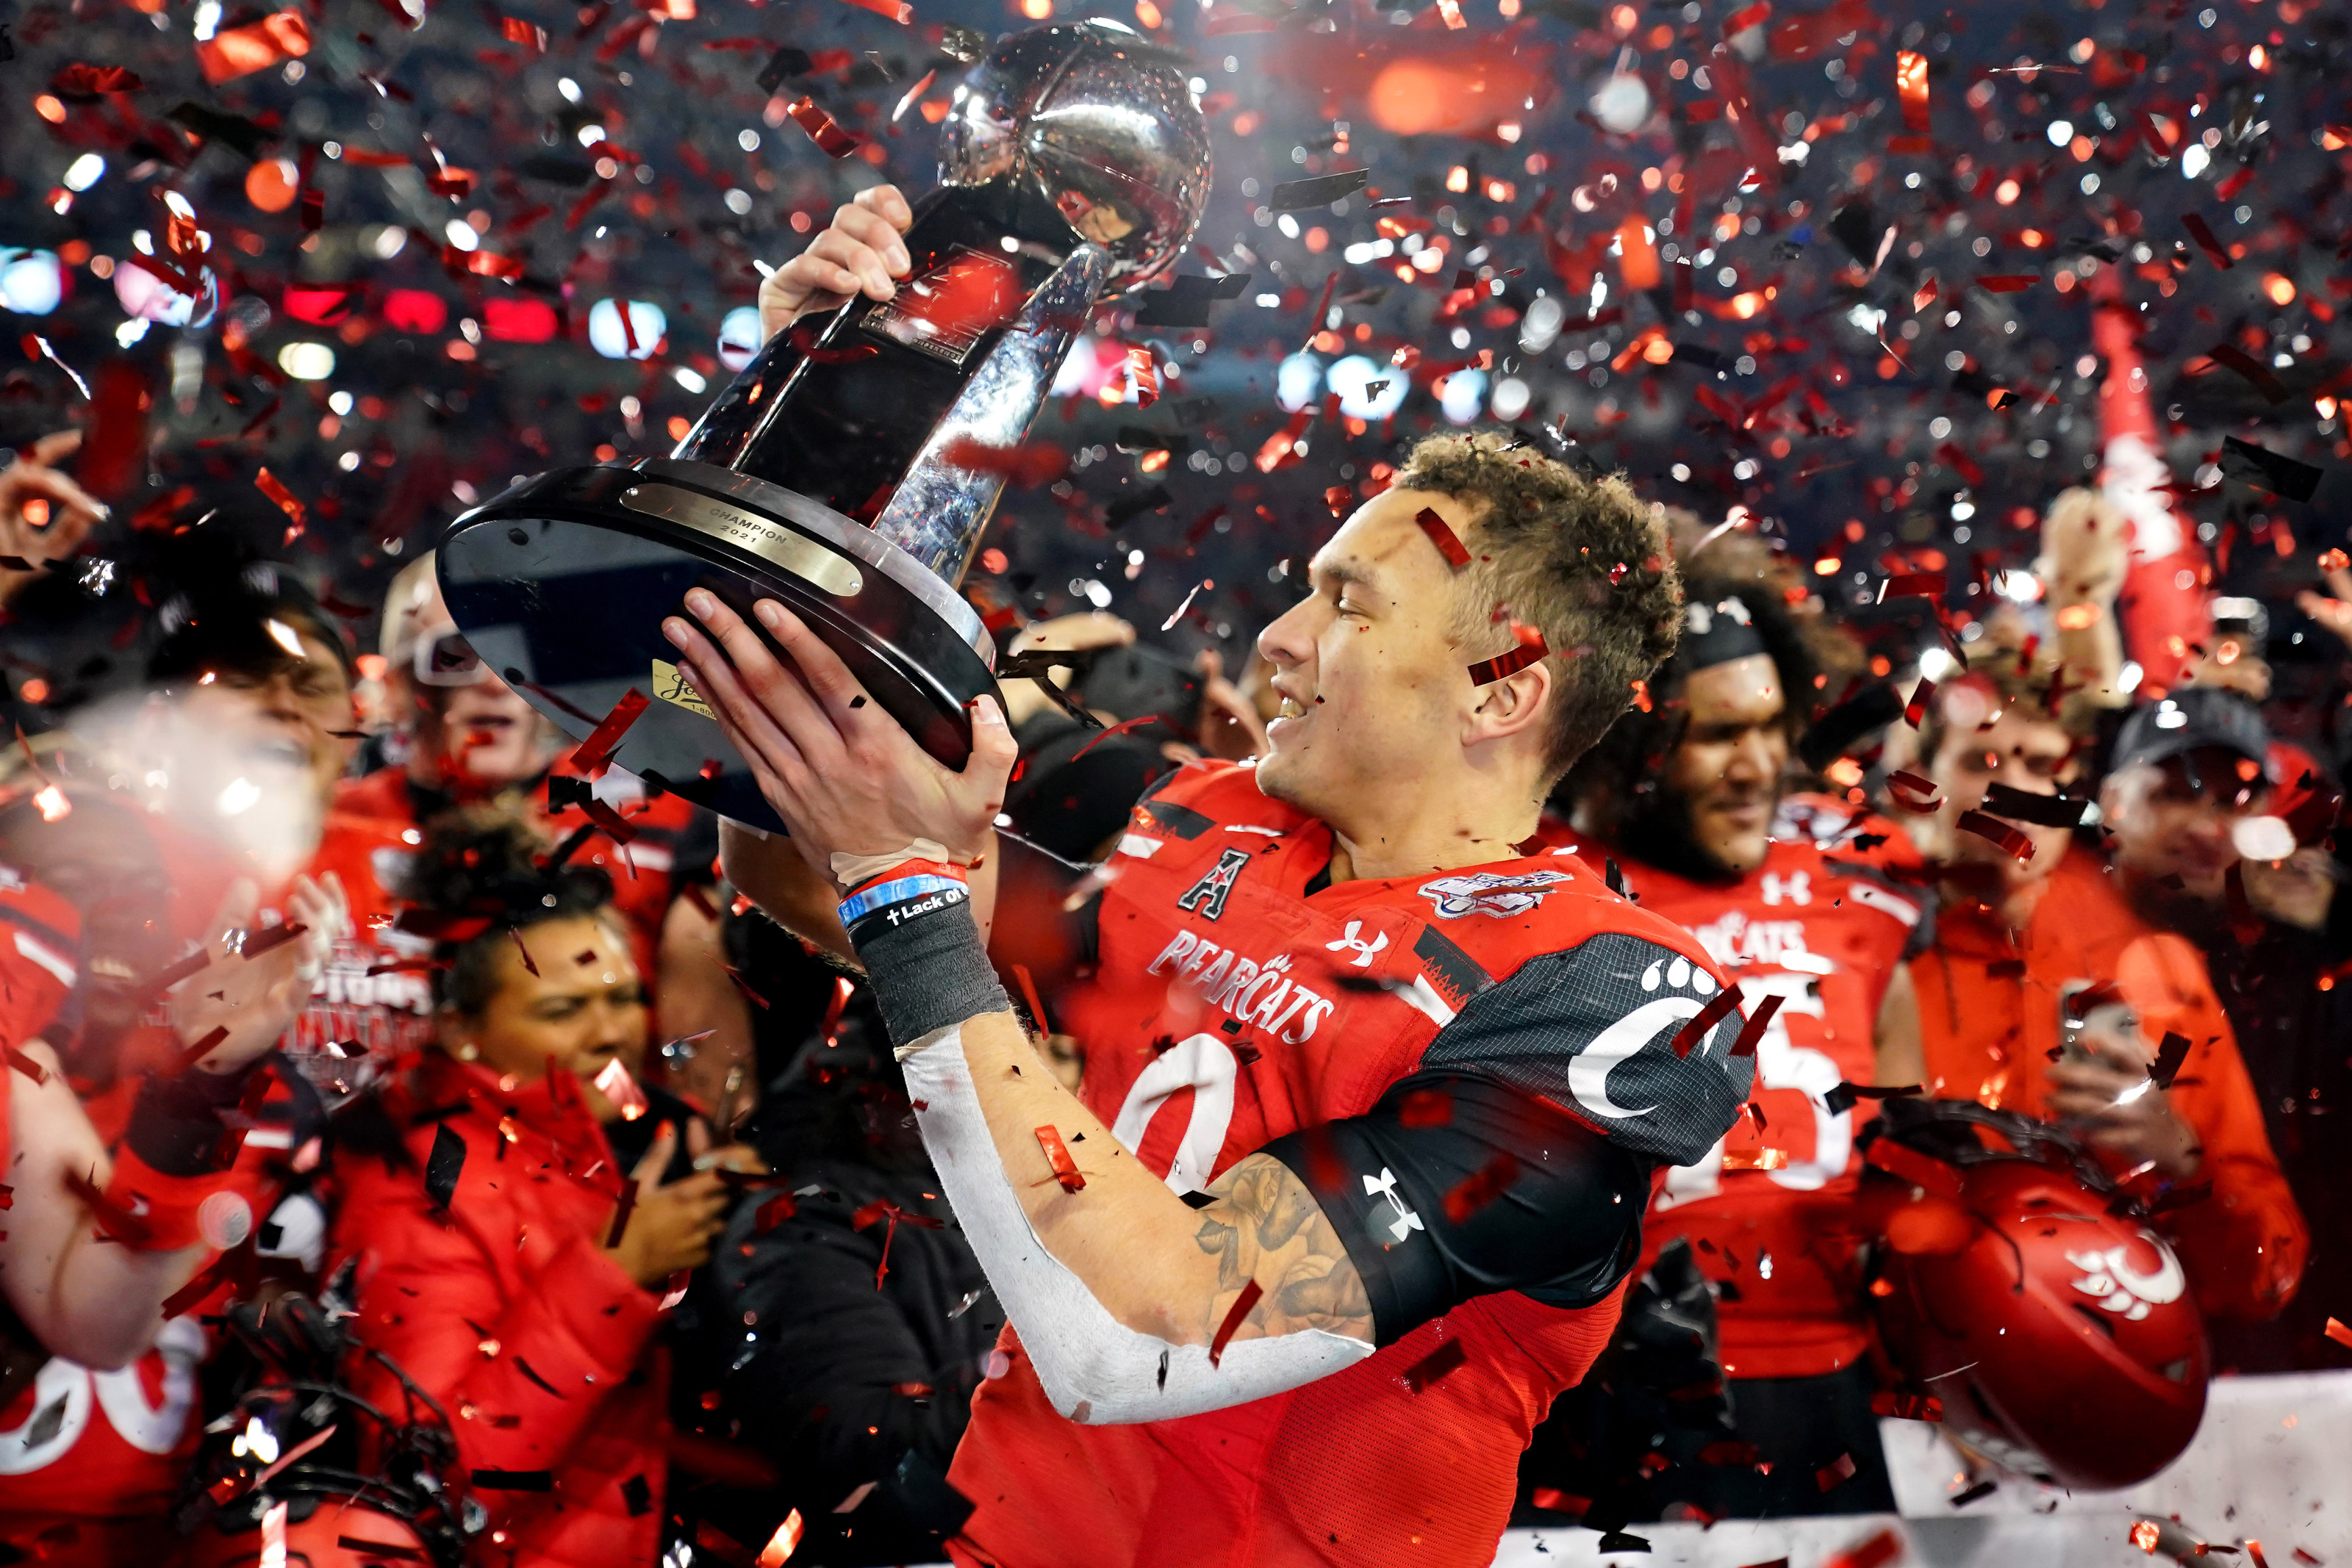 Cincinnati football has made Group of 5 history in College Football Playoff